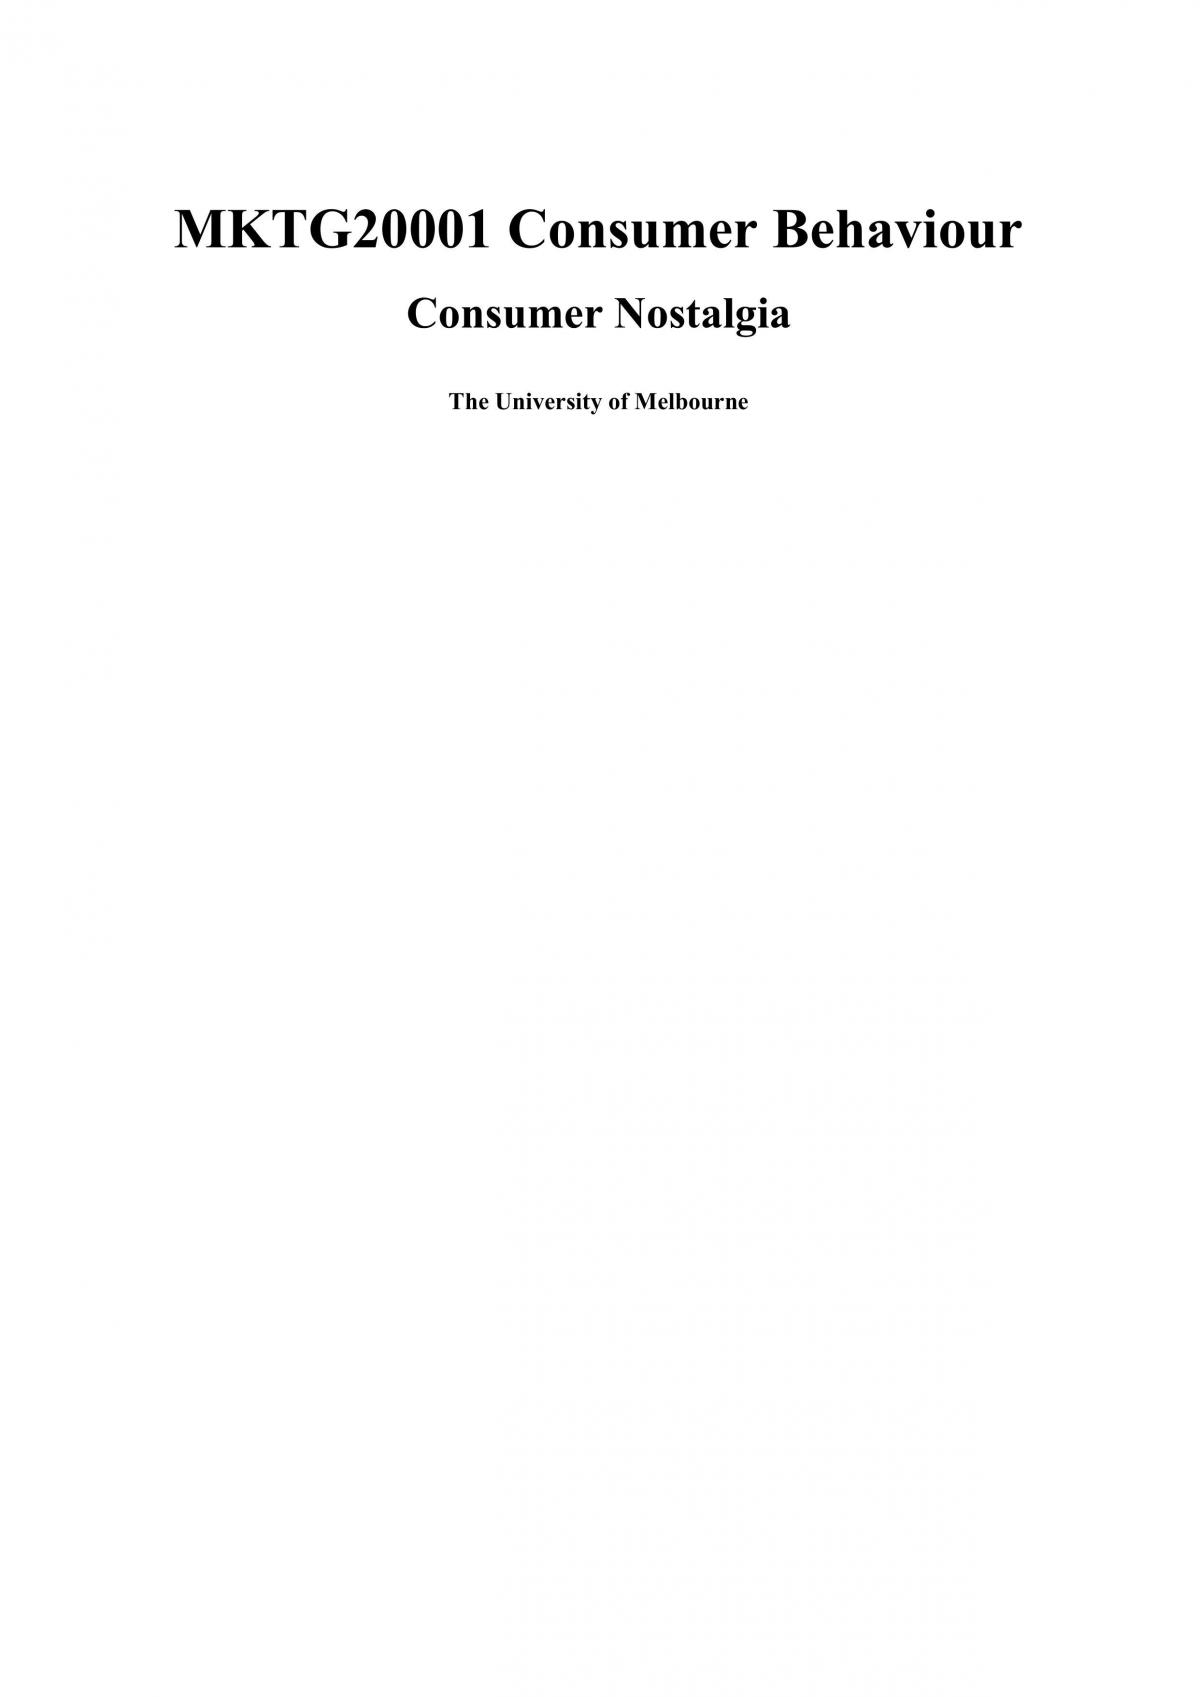 Assignment - Report on Consumer Nostalgia  - Page 1